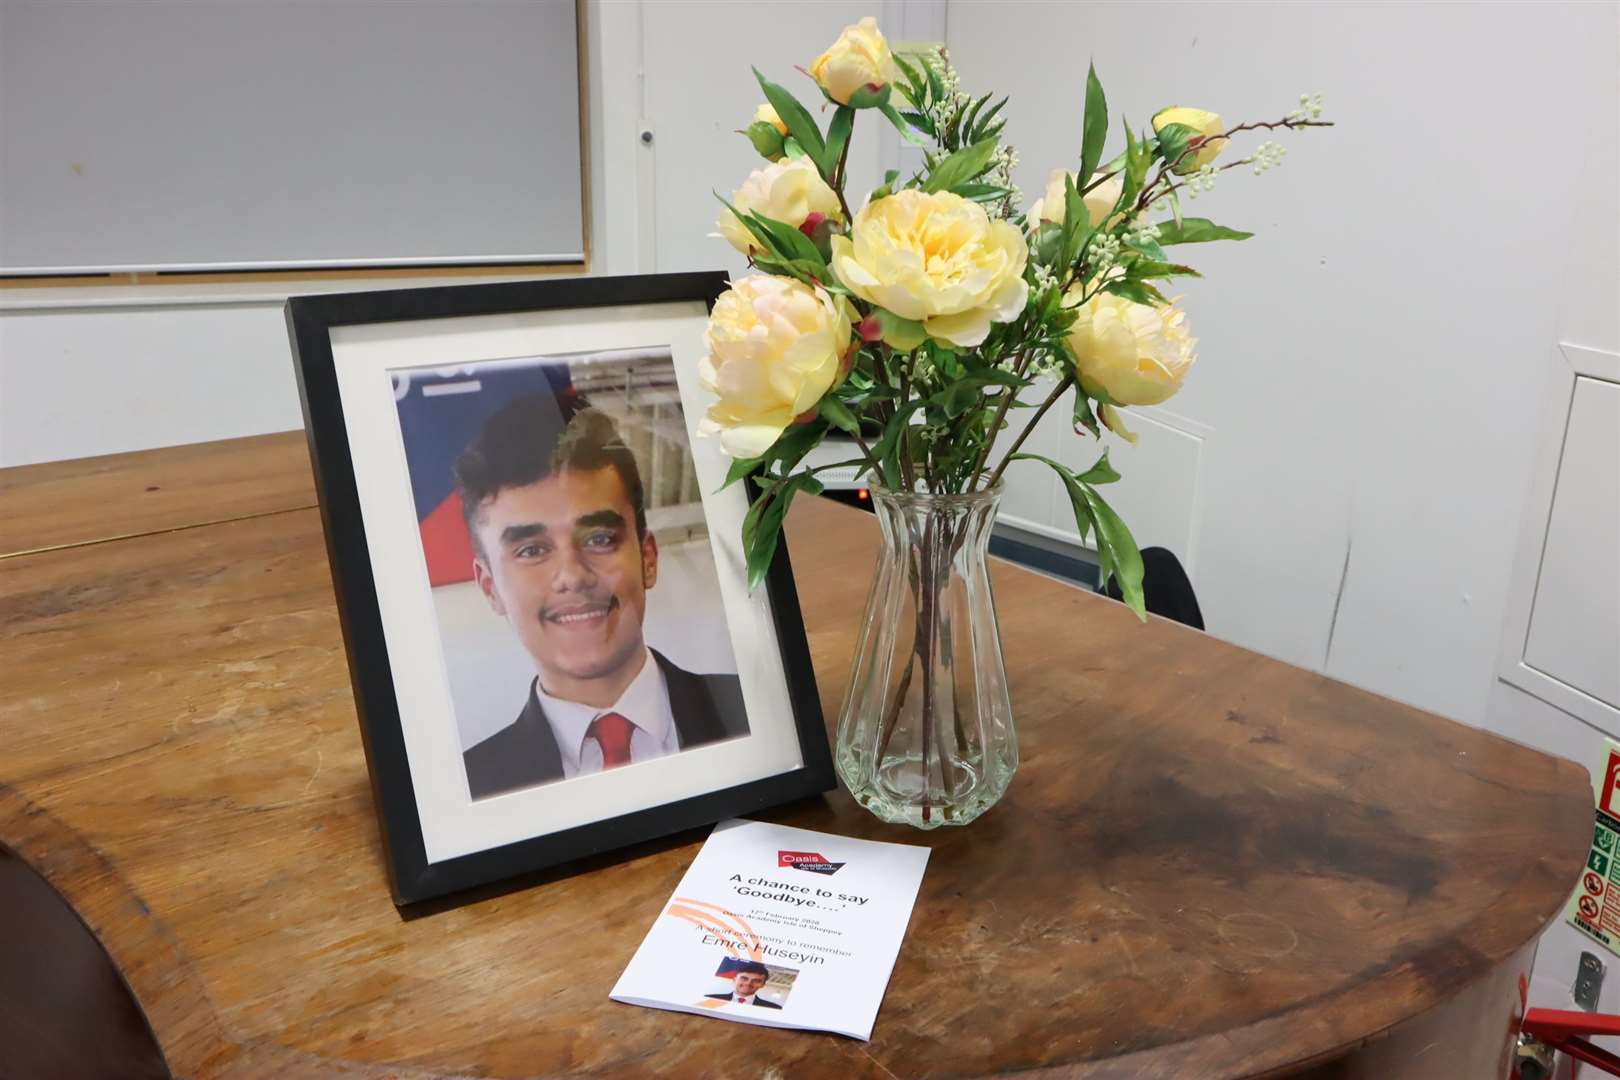 Flowers, portrait and programme for the ceremony to remember Emre Huseyin at the Oasis Academy, Sheppey